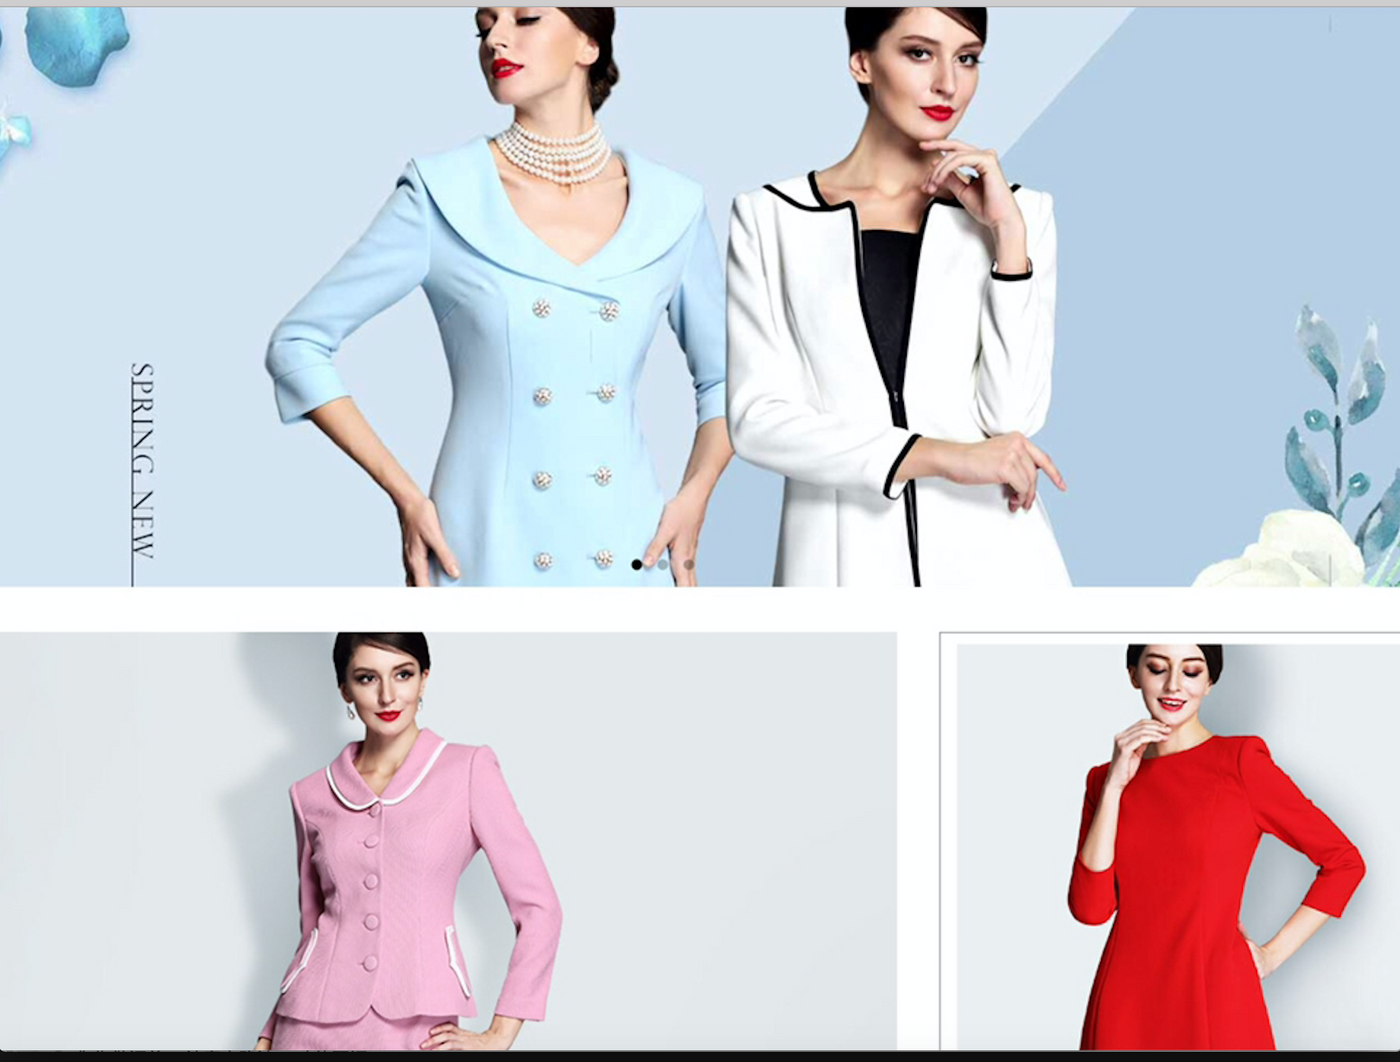 New Membership ( DL CHIC & DL COUTURE) - For Global Leading Women